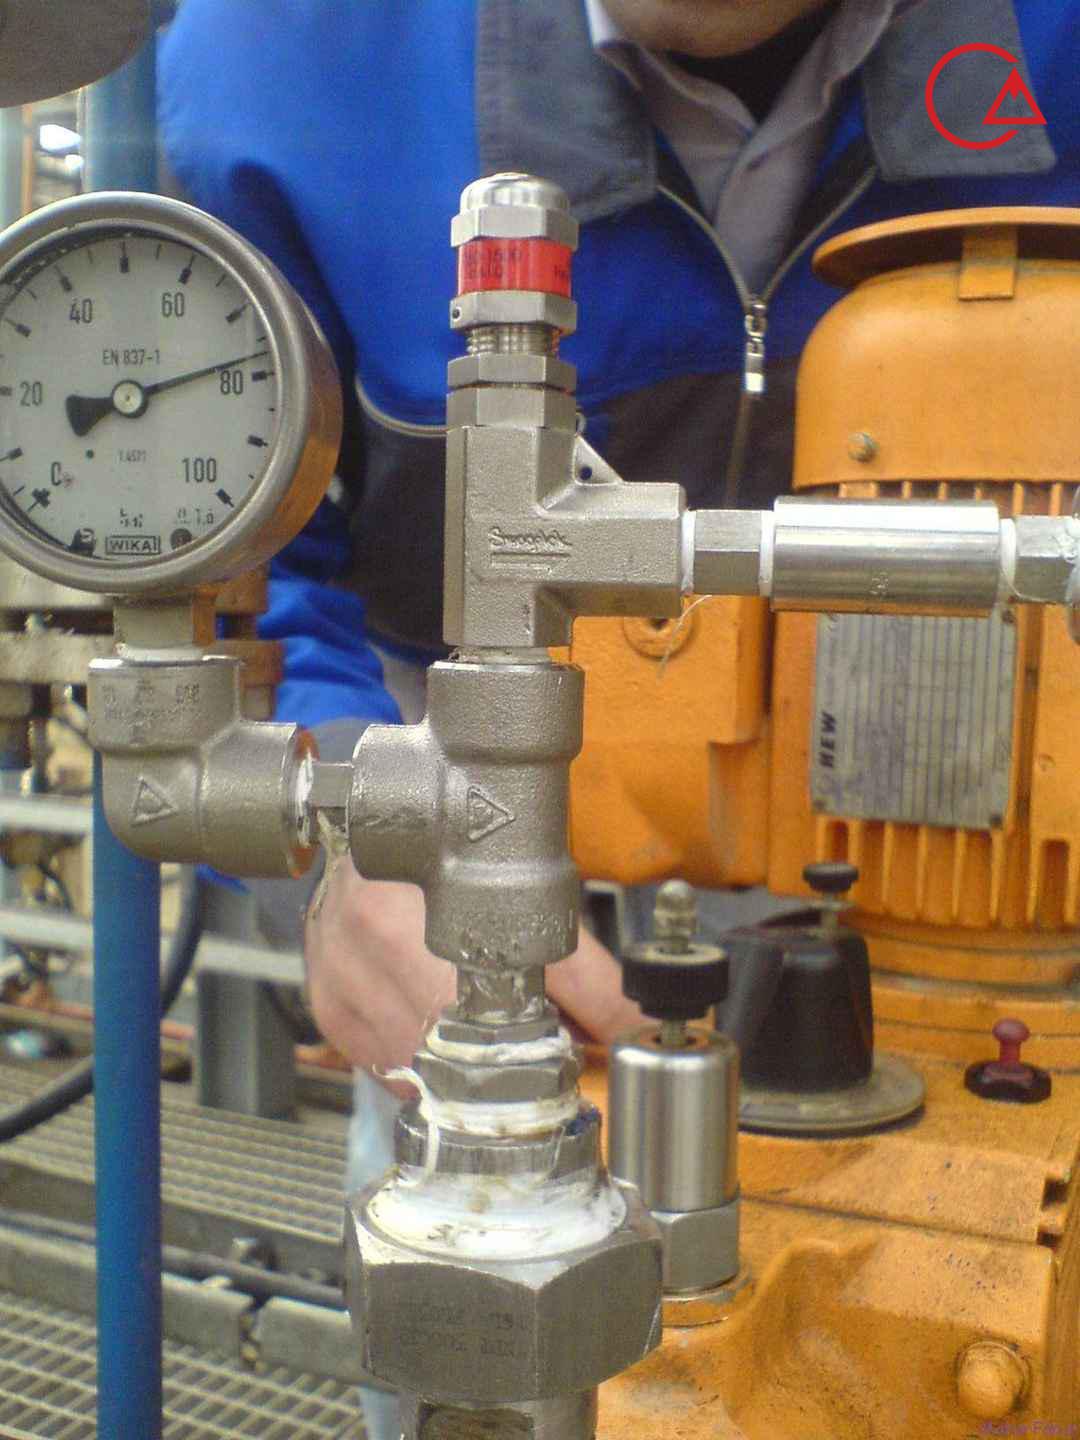 Relief Valve on ProMinent Hydro Hydraulic Metering Pump